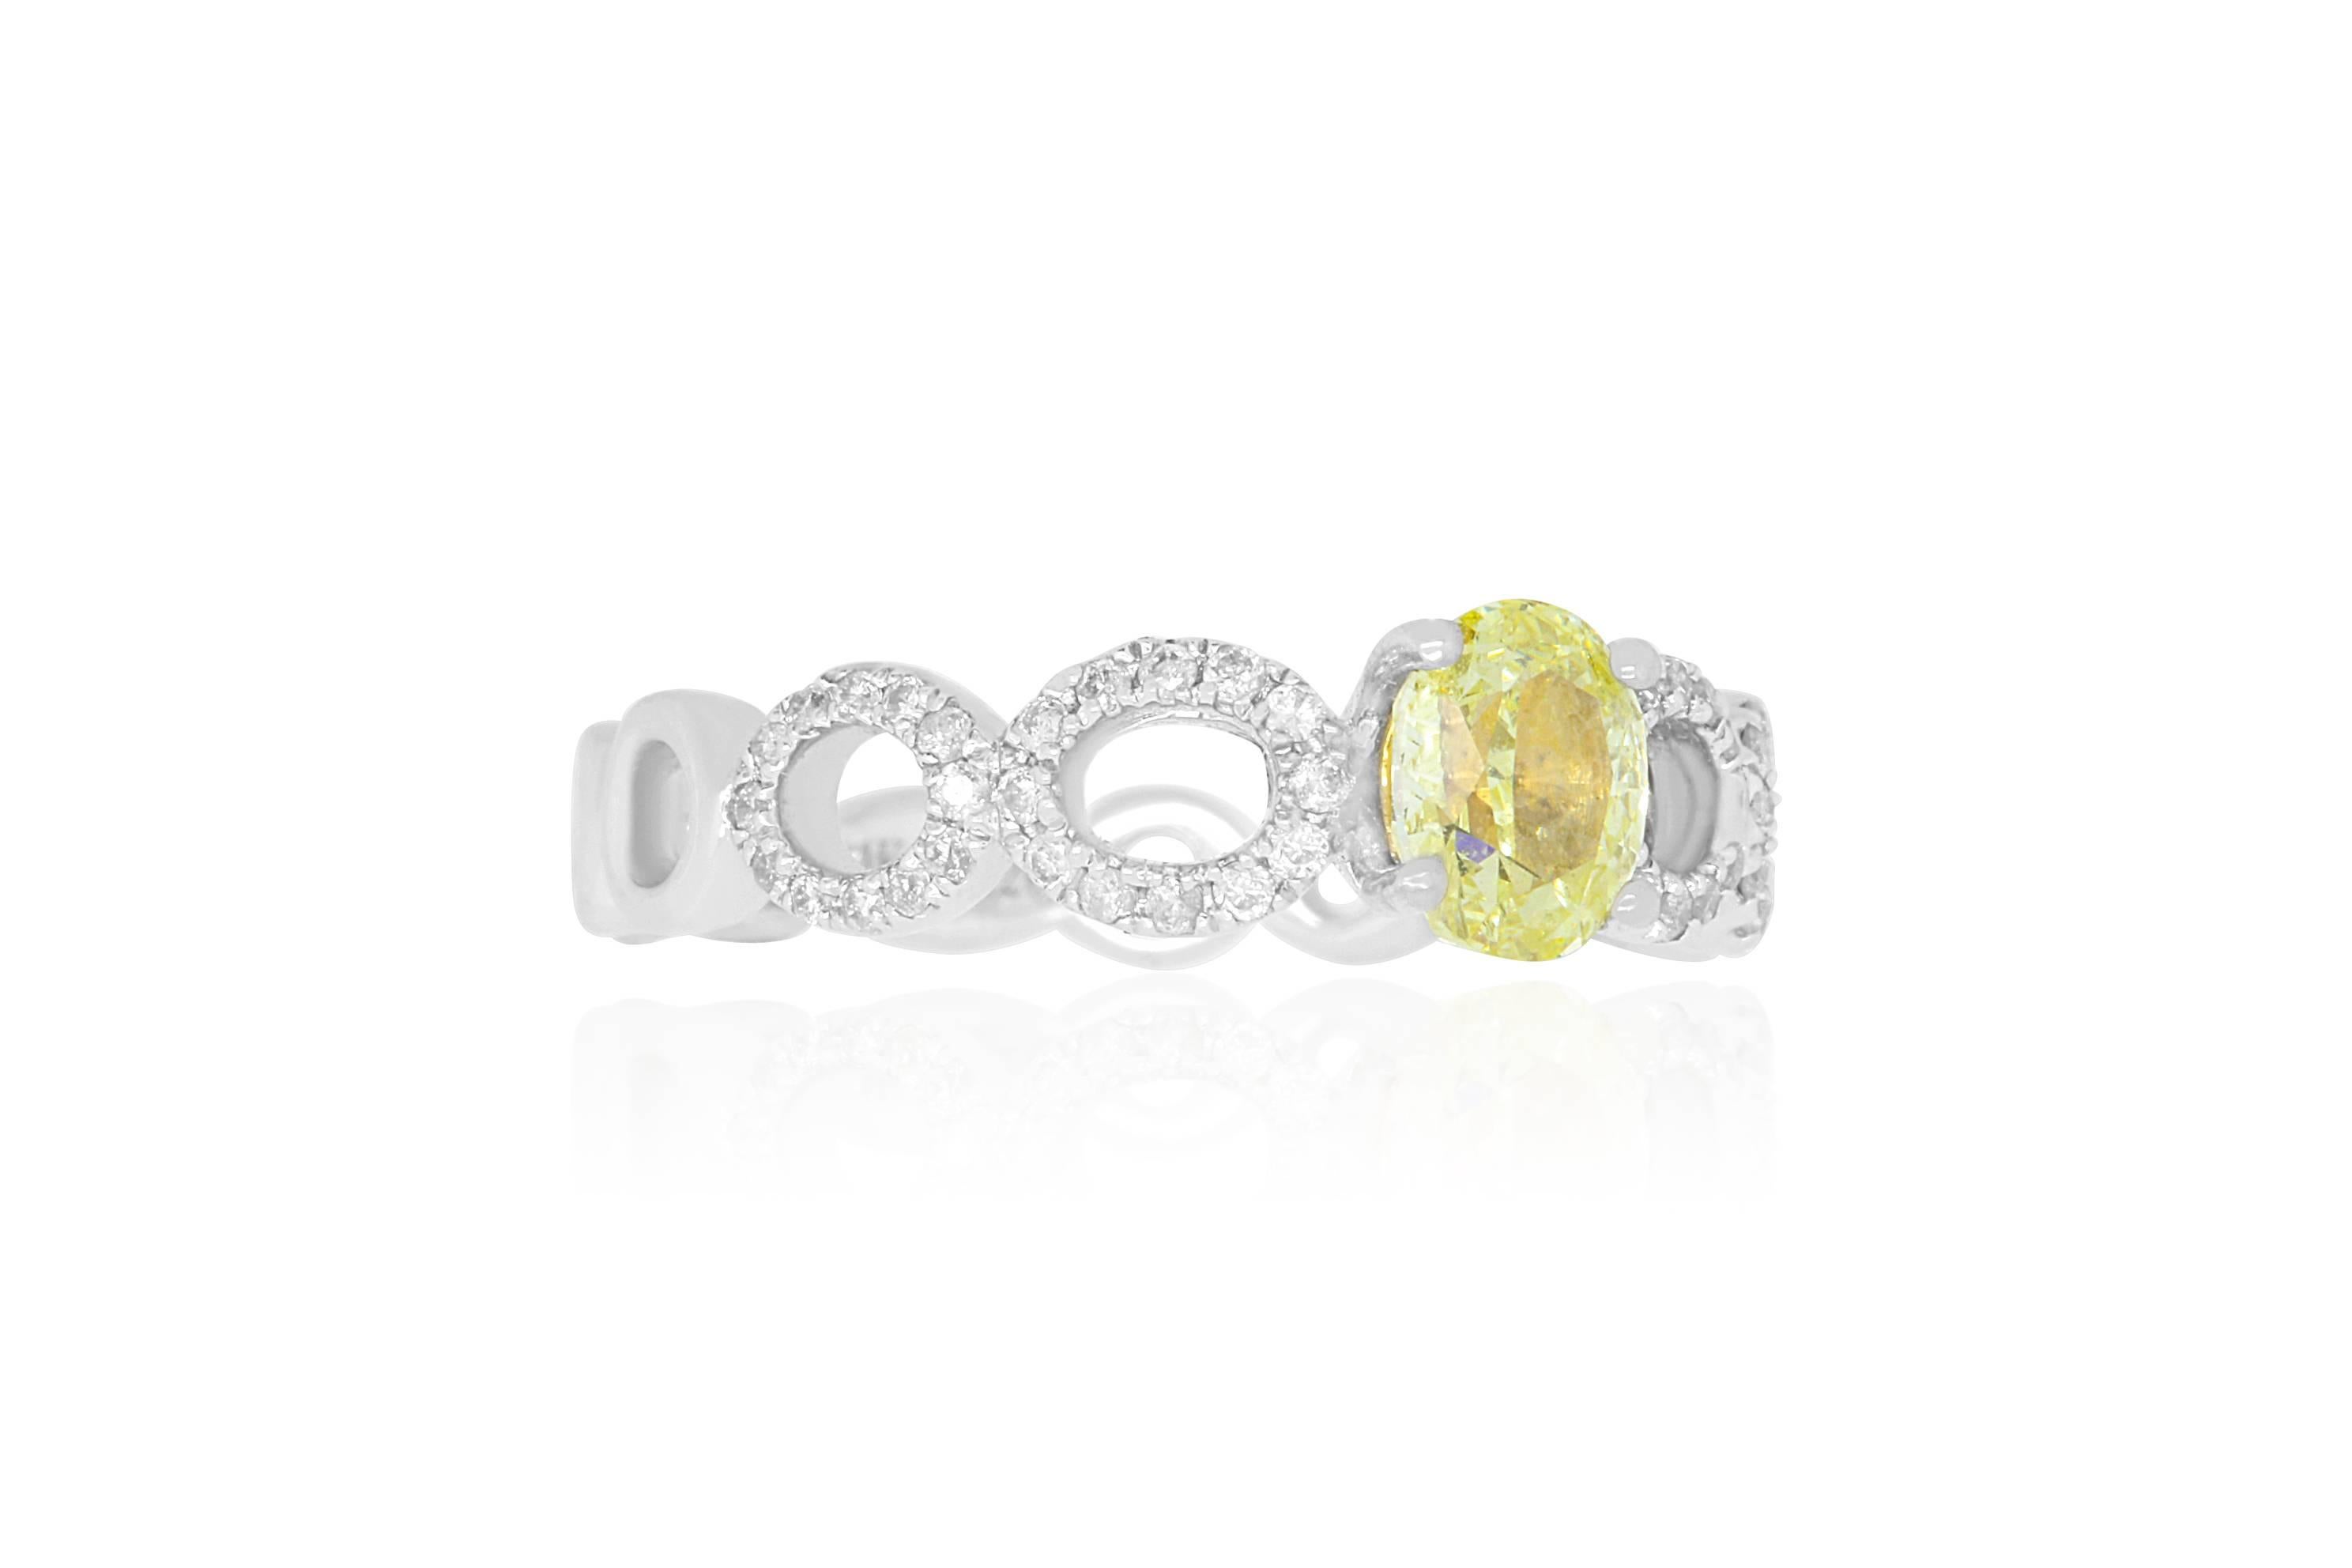 Material: 14K White Gold 
Center Stone Details: 1 Oval Shaped Yellow Diamond at 0.71 
Stone Details: Round White Diamonds at 0.20 Carats - Clarity: SI  / Color: H-I
Ring Size: Size 5.5. Alberto offers complimentary sizing on all rings.

Fine